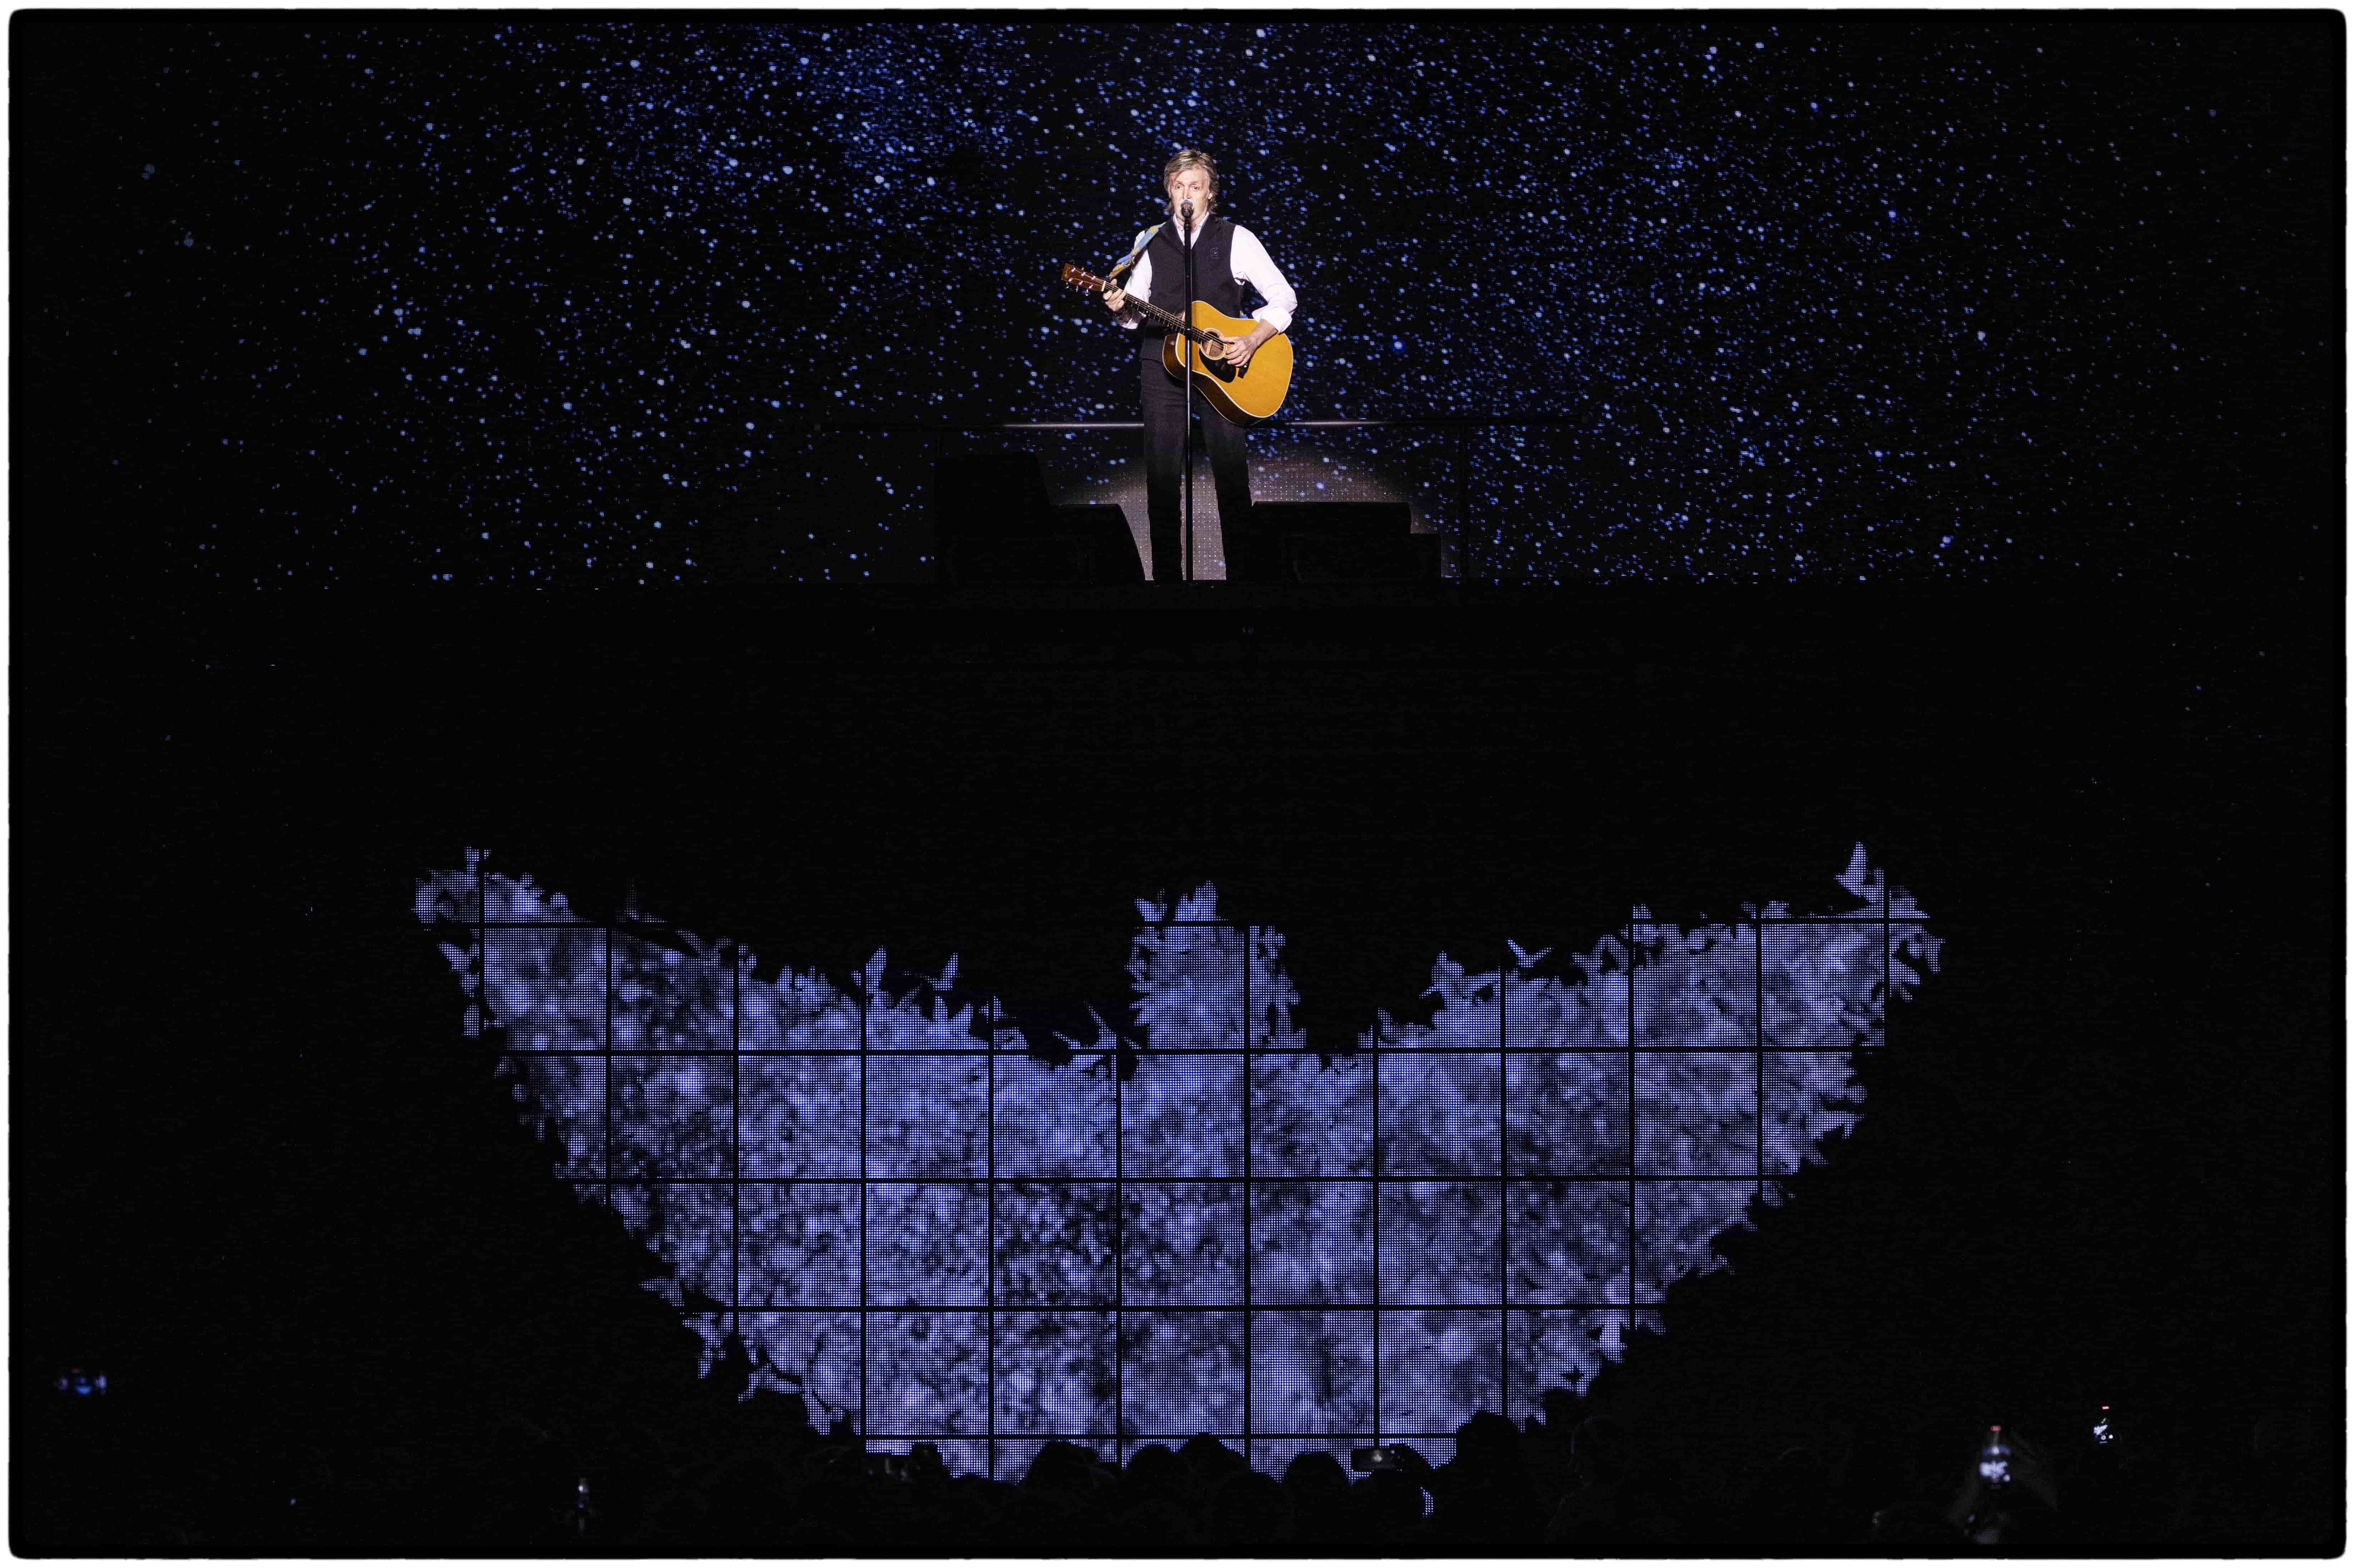 Paul playing guitar on a raised stage, with a light projection in the shape of a bird underneath him